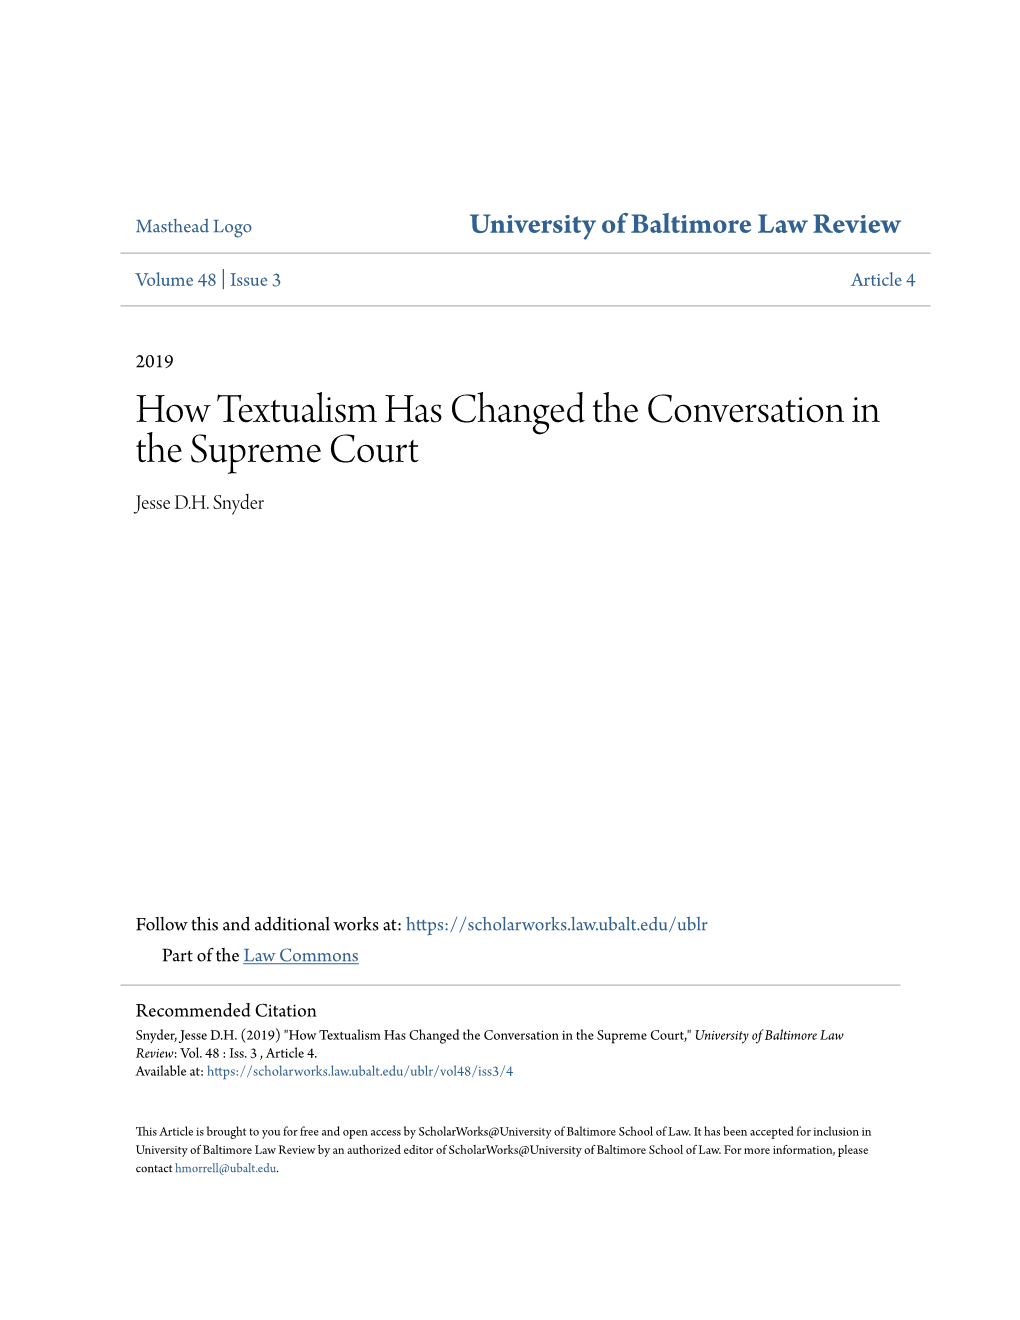 How Textualism Has Changed the Conversation in the Supreme Court Jesse D.H